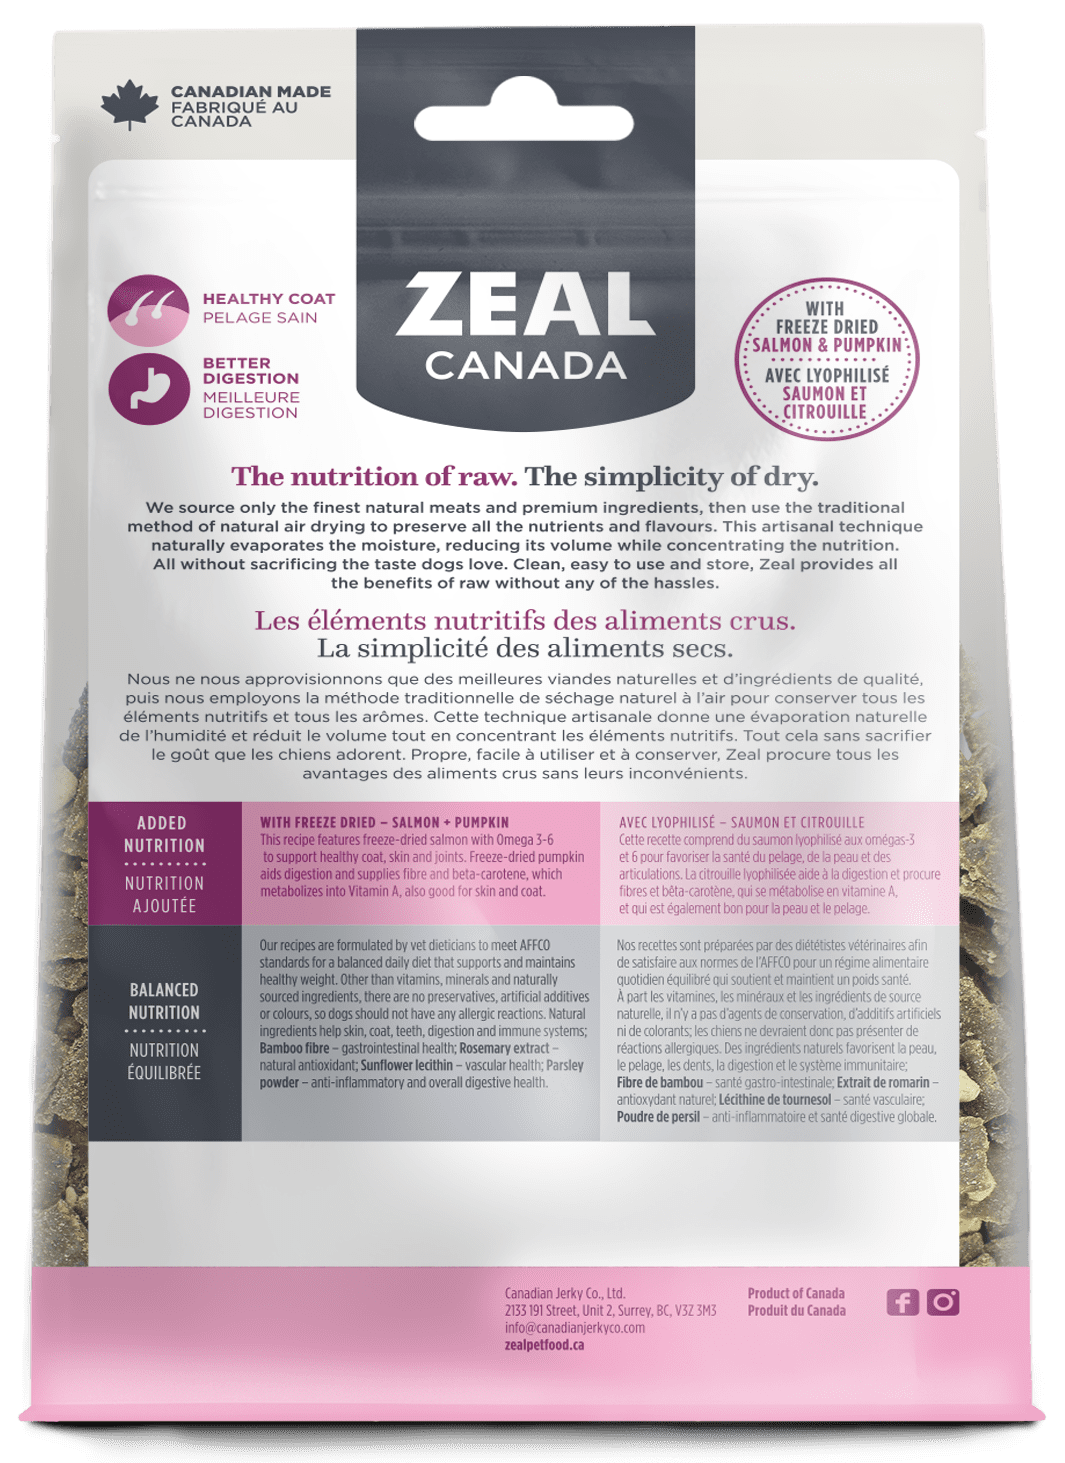 Zeal Canada - Gently Air-Dried Turkey with Freeze-Dried Salmon & Pumpkin (For Dogs-2